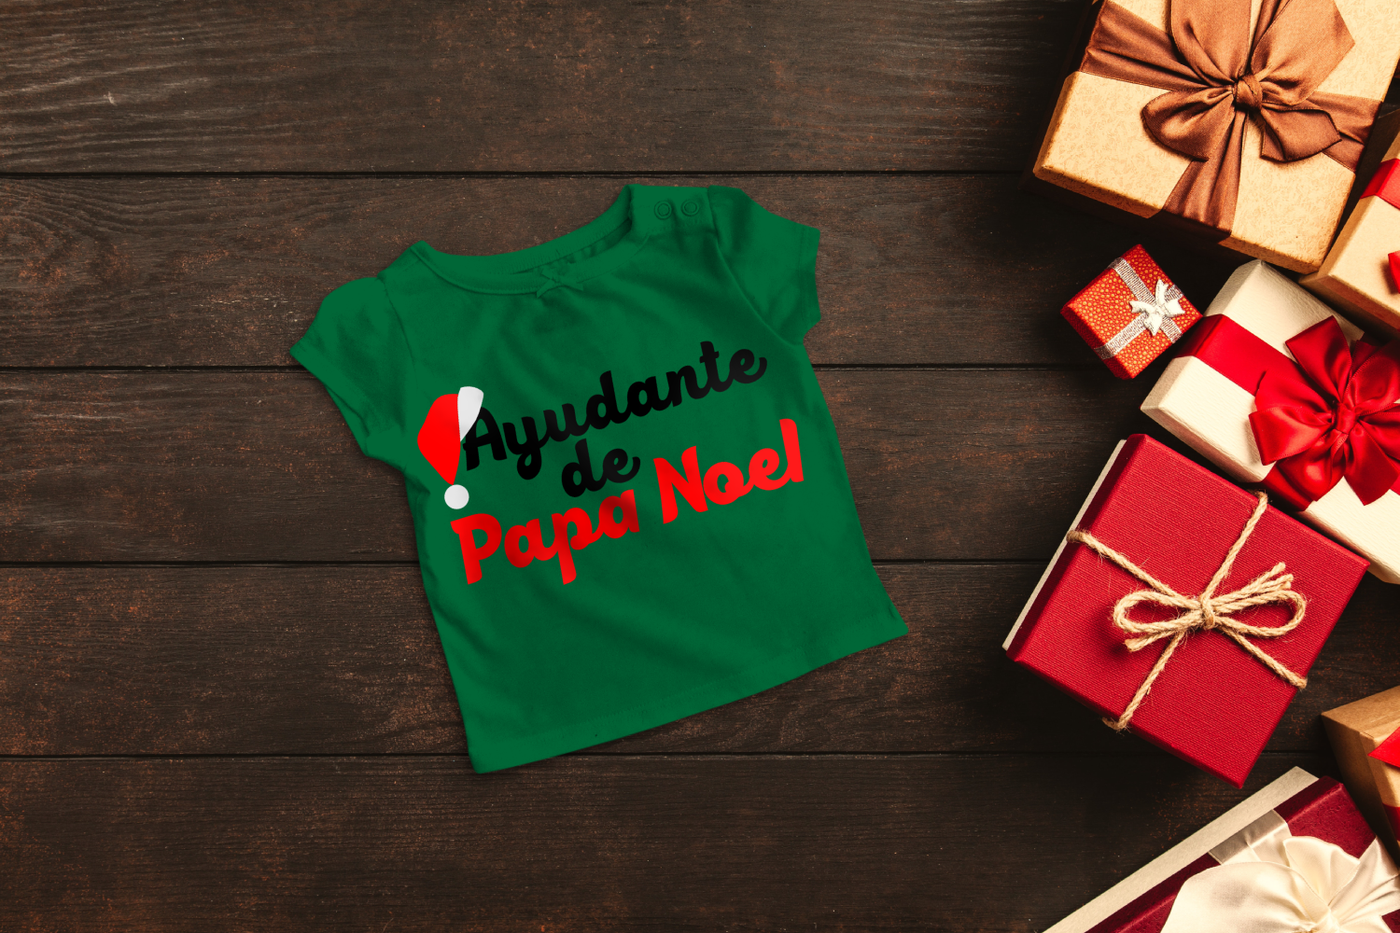 A green child's shirt lays on a dark wood background with red and gold wrapped gifts to the side. The shirt has the words "Ayudante de Papa Noel" with a Santa hat hanging off of the first A.